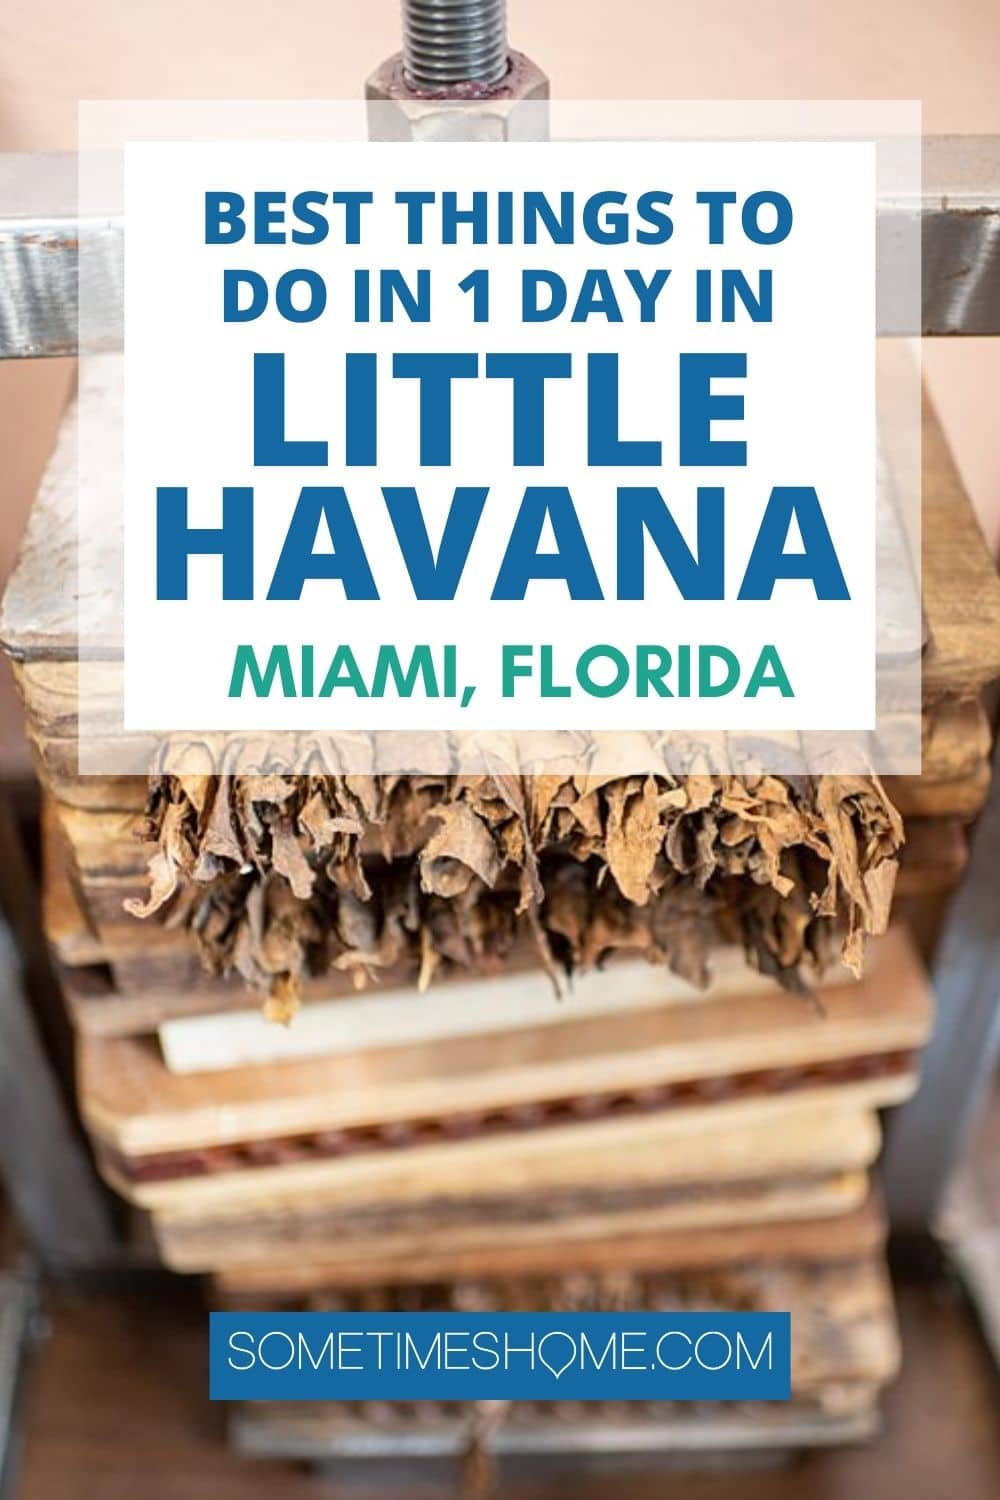 Best things to do in Little Havana, Miami, Florida with a picture of cigars being pressed behind it.